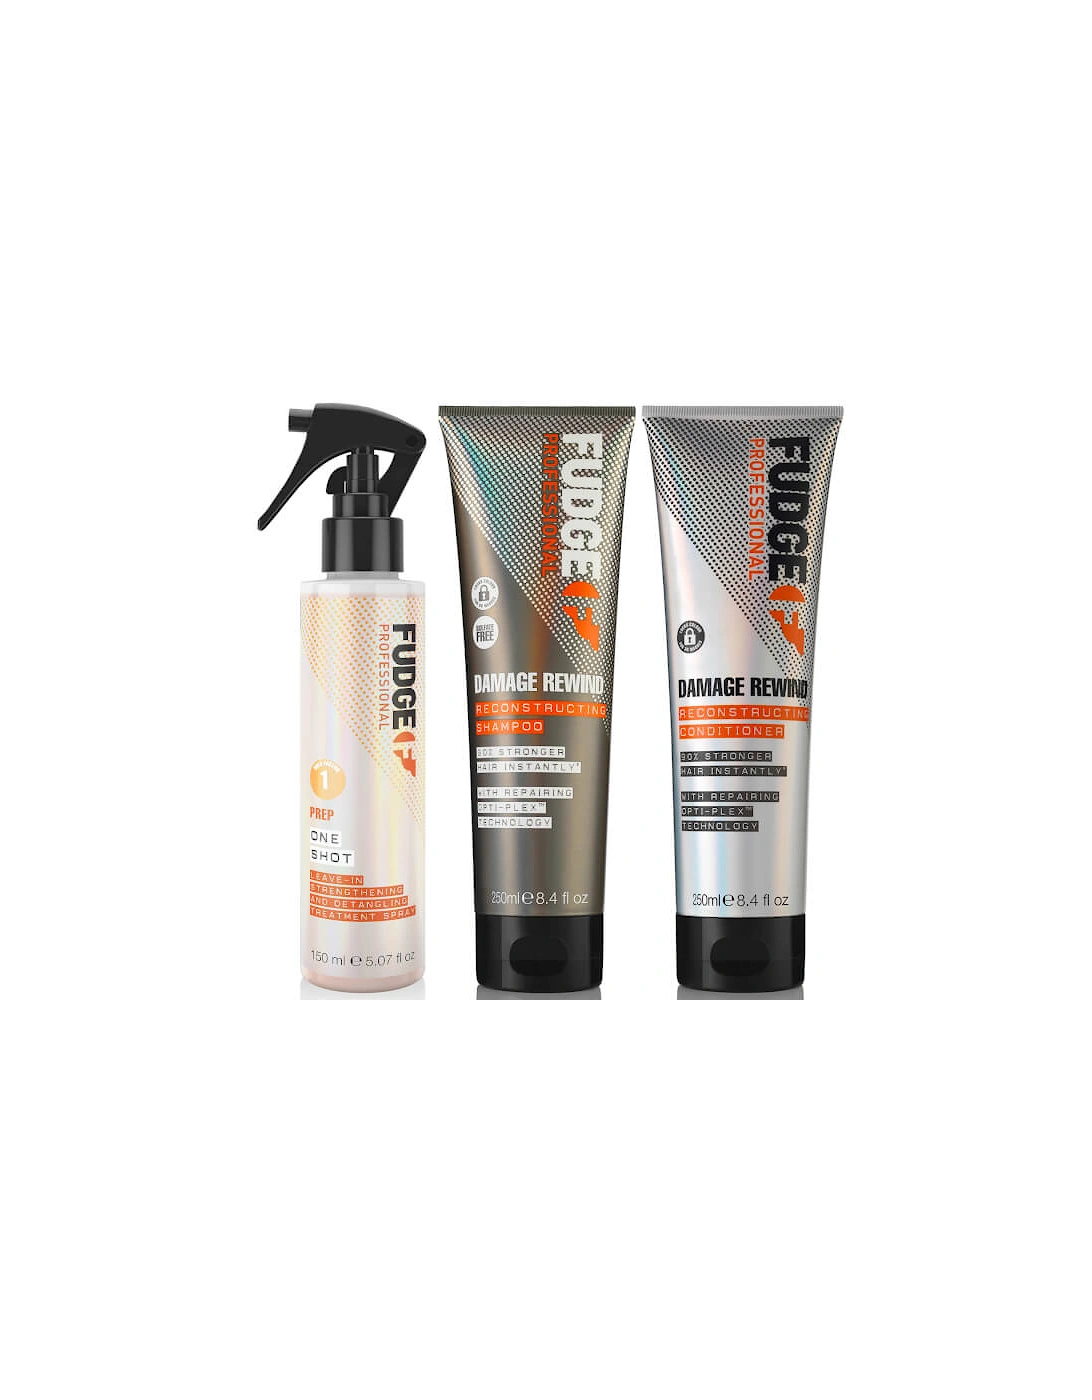 Professional Damage Rewind Shampoo, Conditioner and One Shot Bundle - Professional, 2 of 1